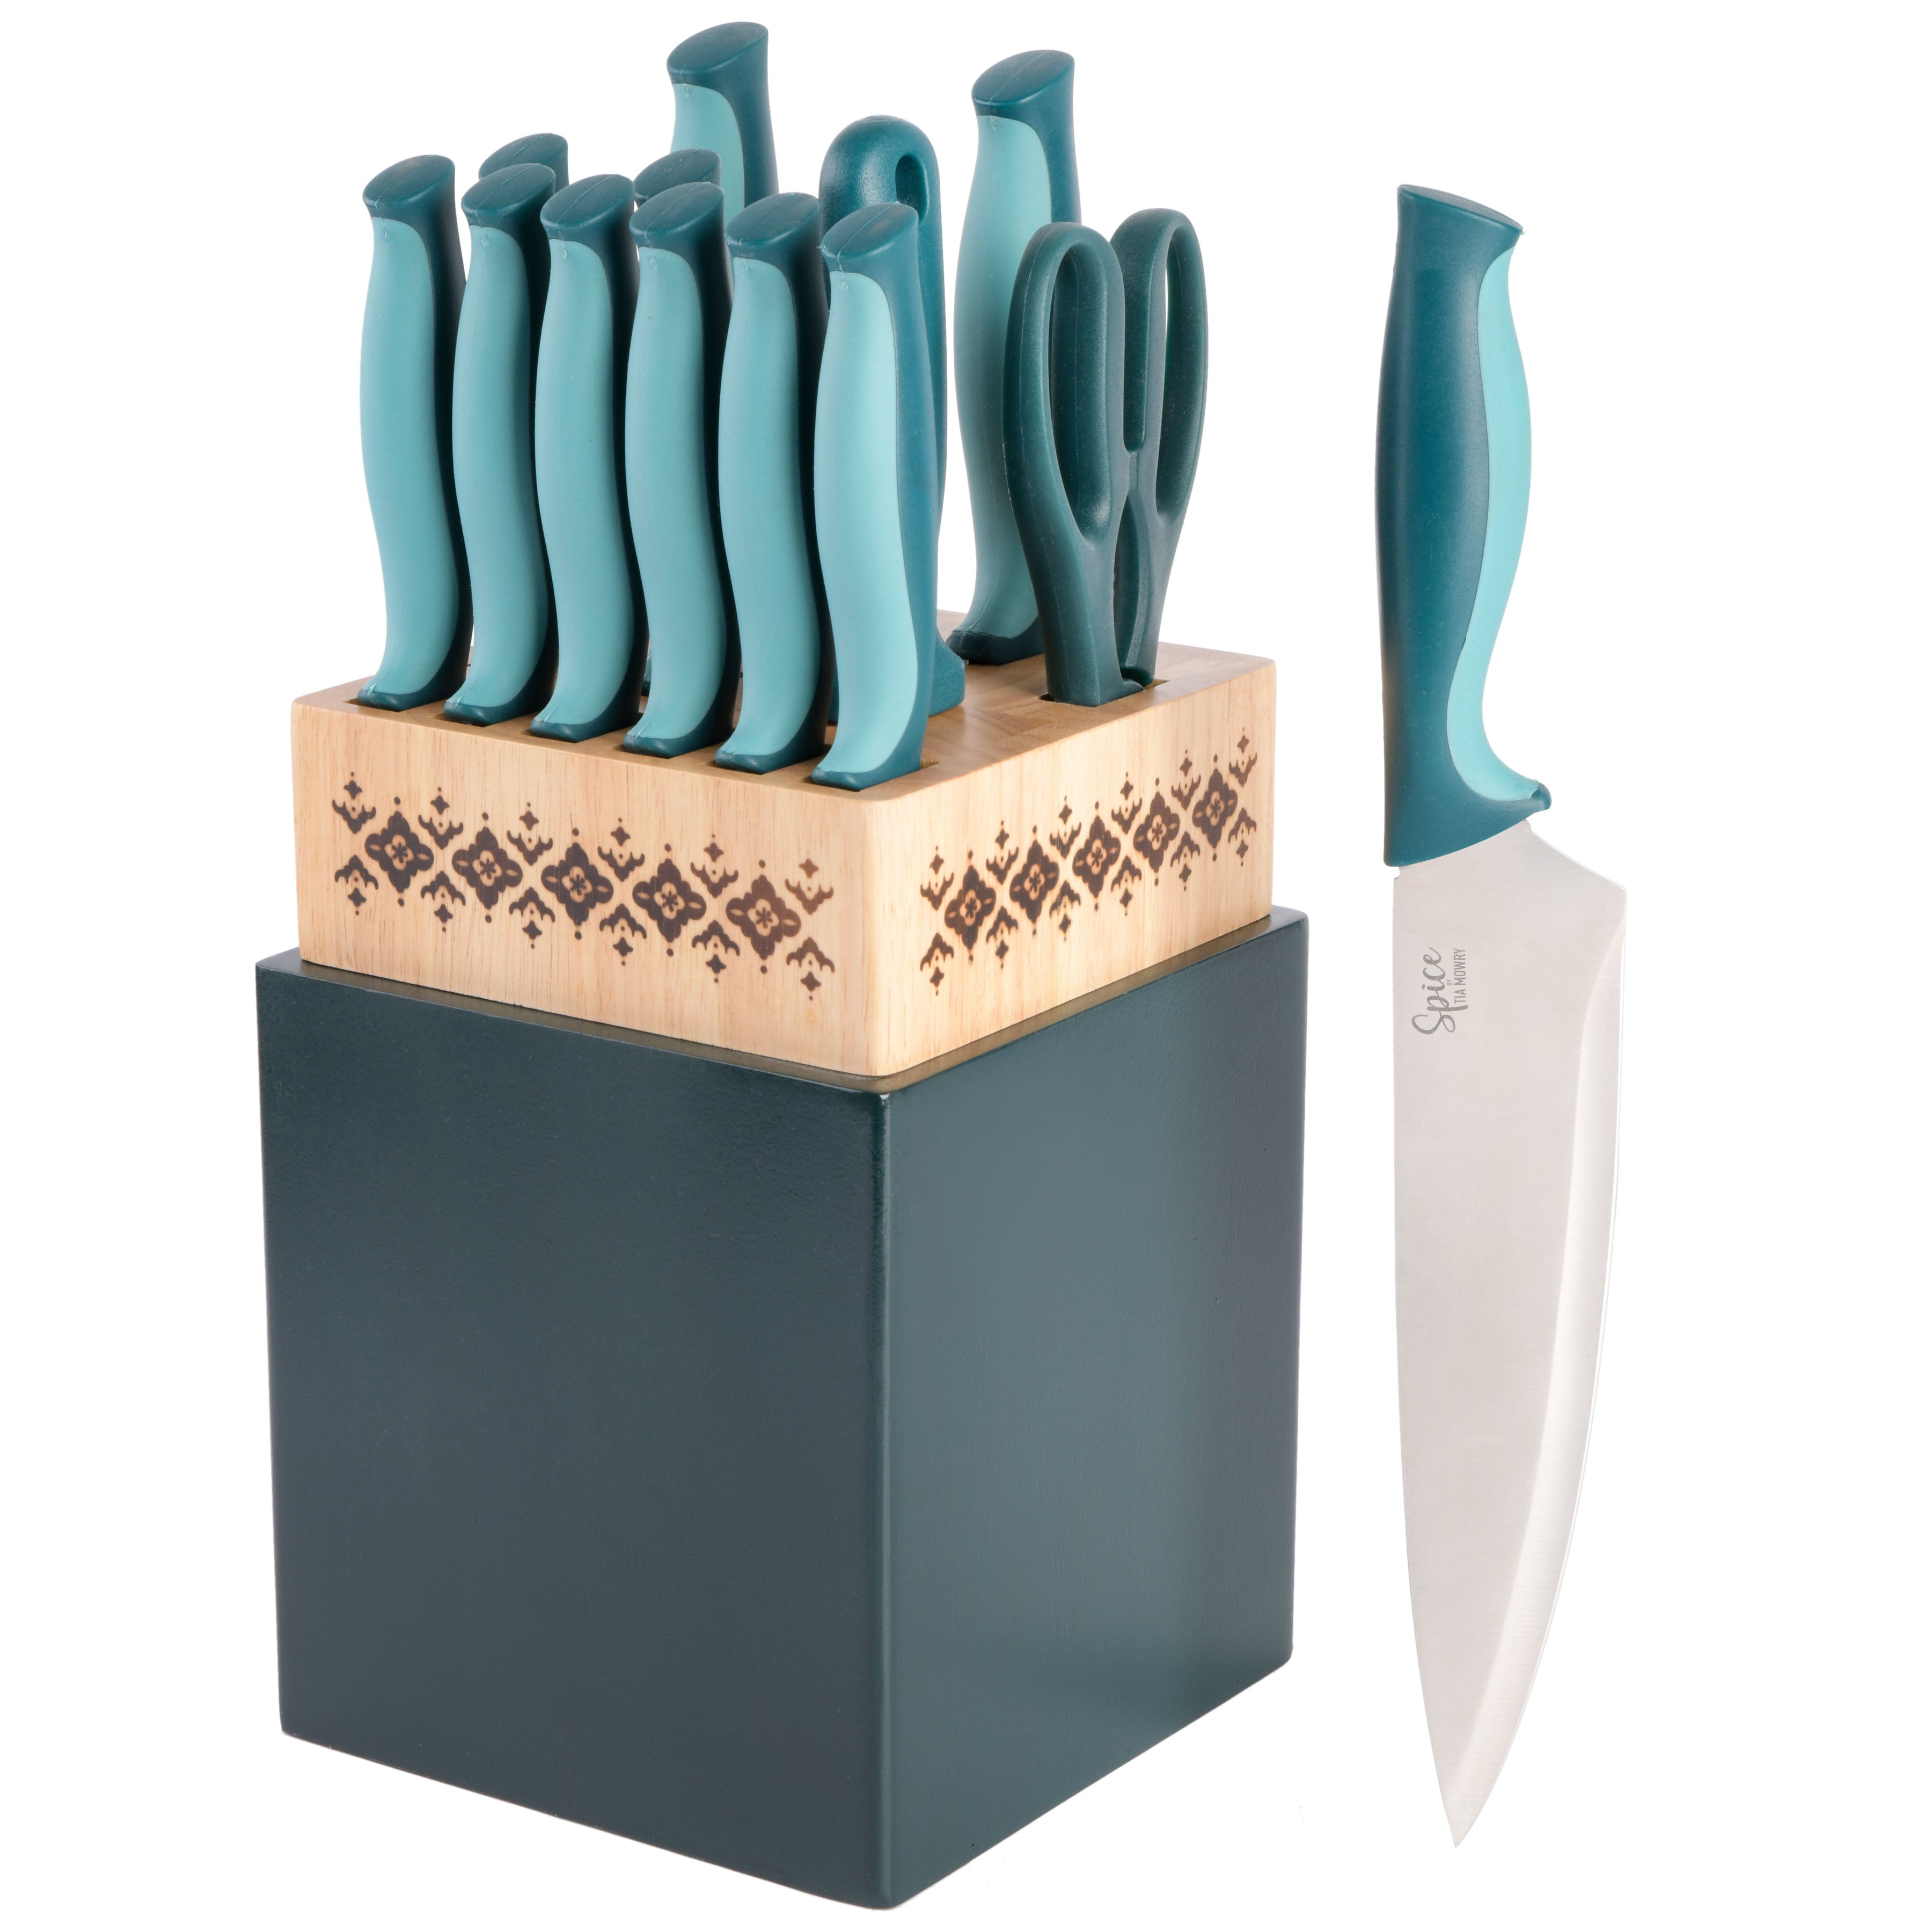 Spice by Tia Mowry Savory Saffron 7-Piece Stainless Steel Cutlery Set